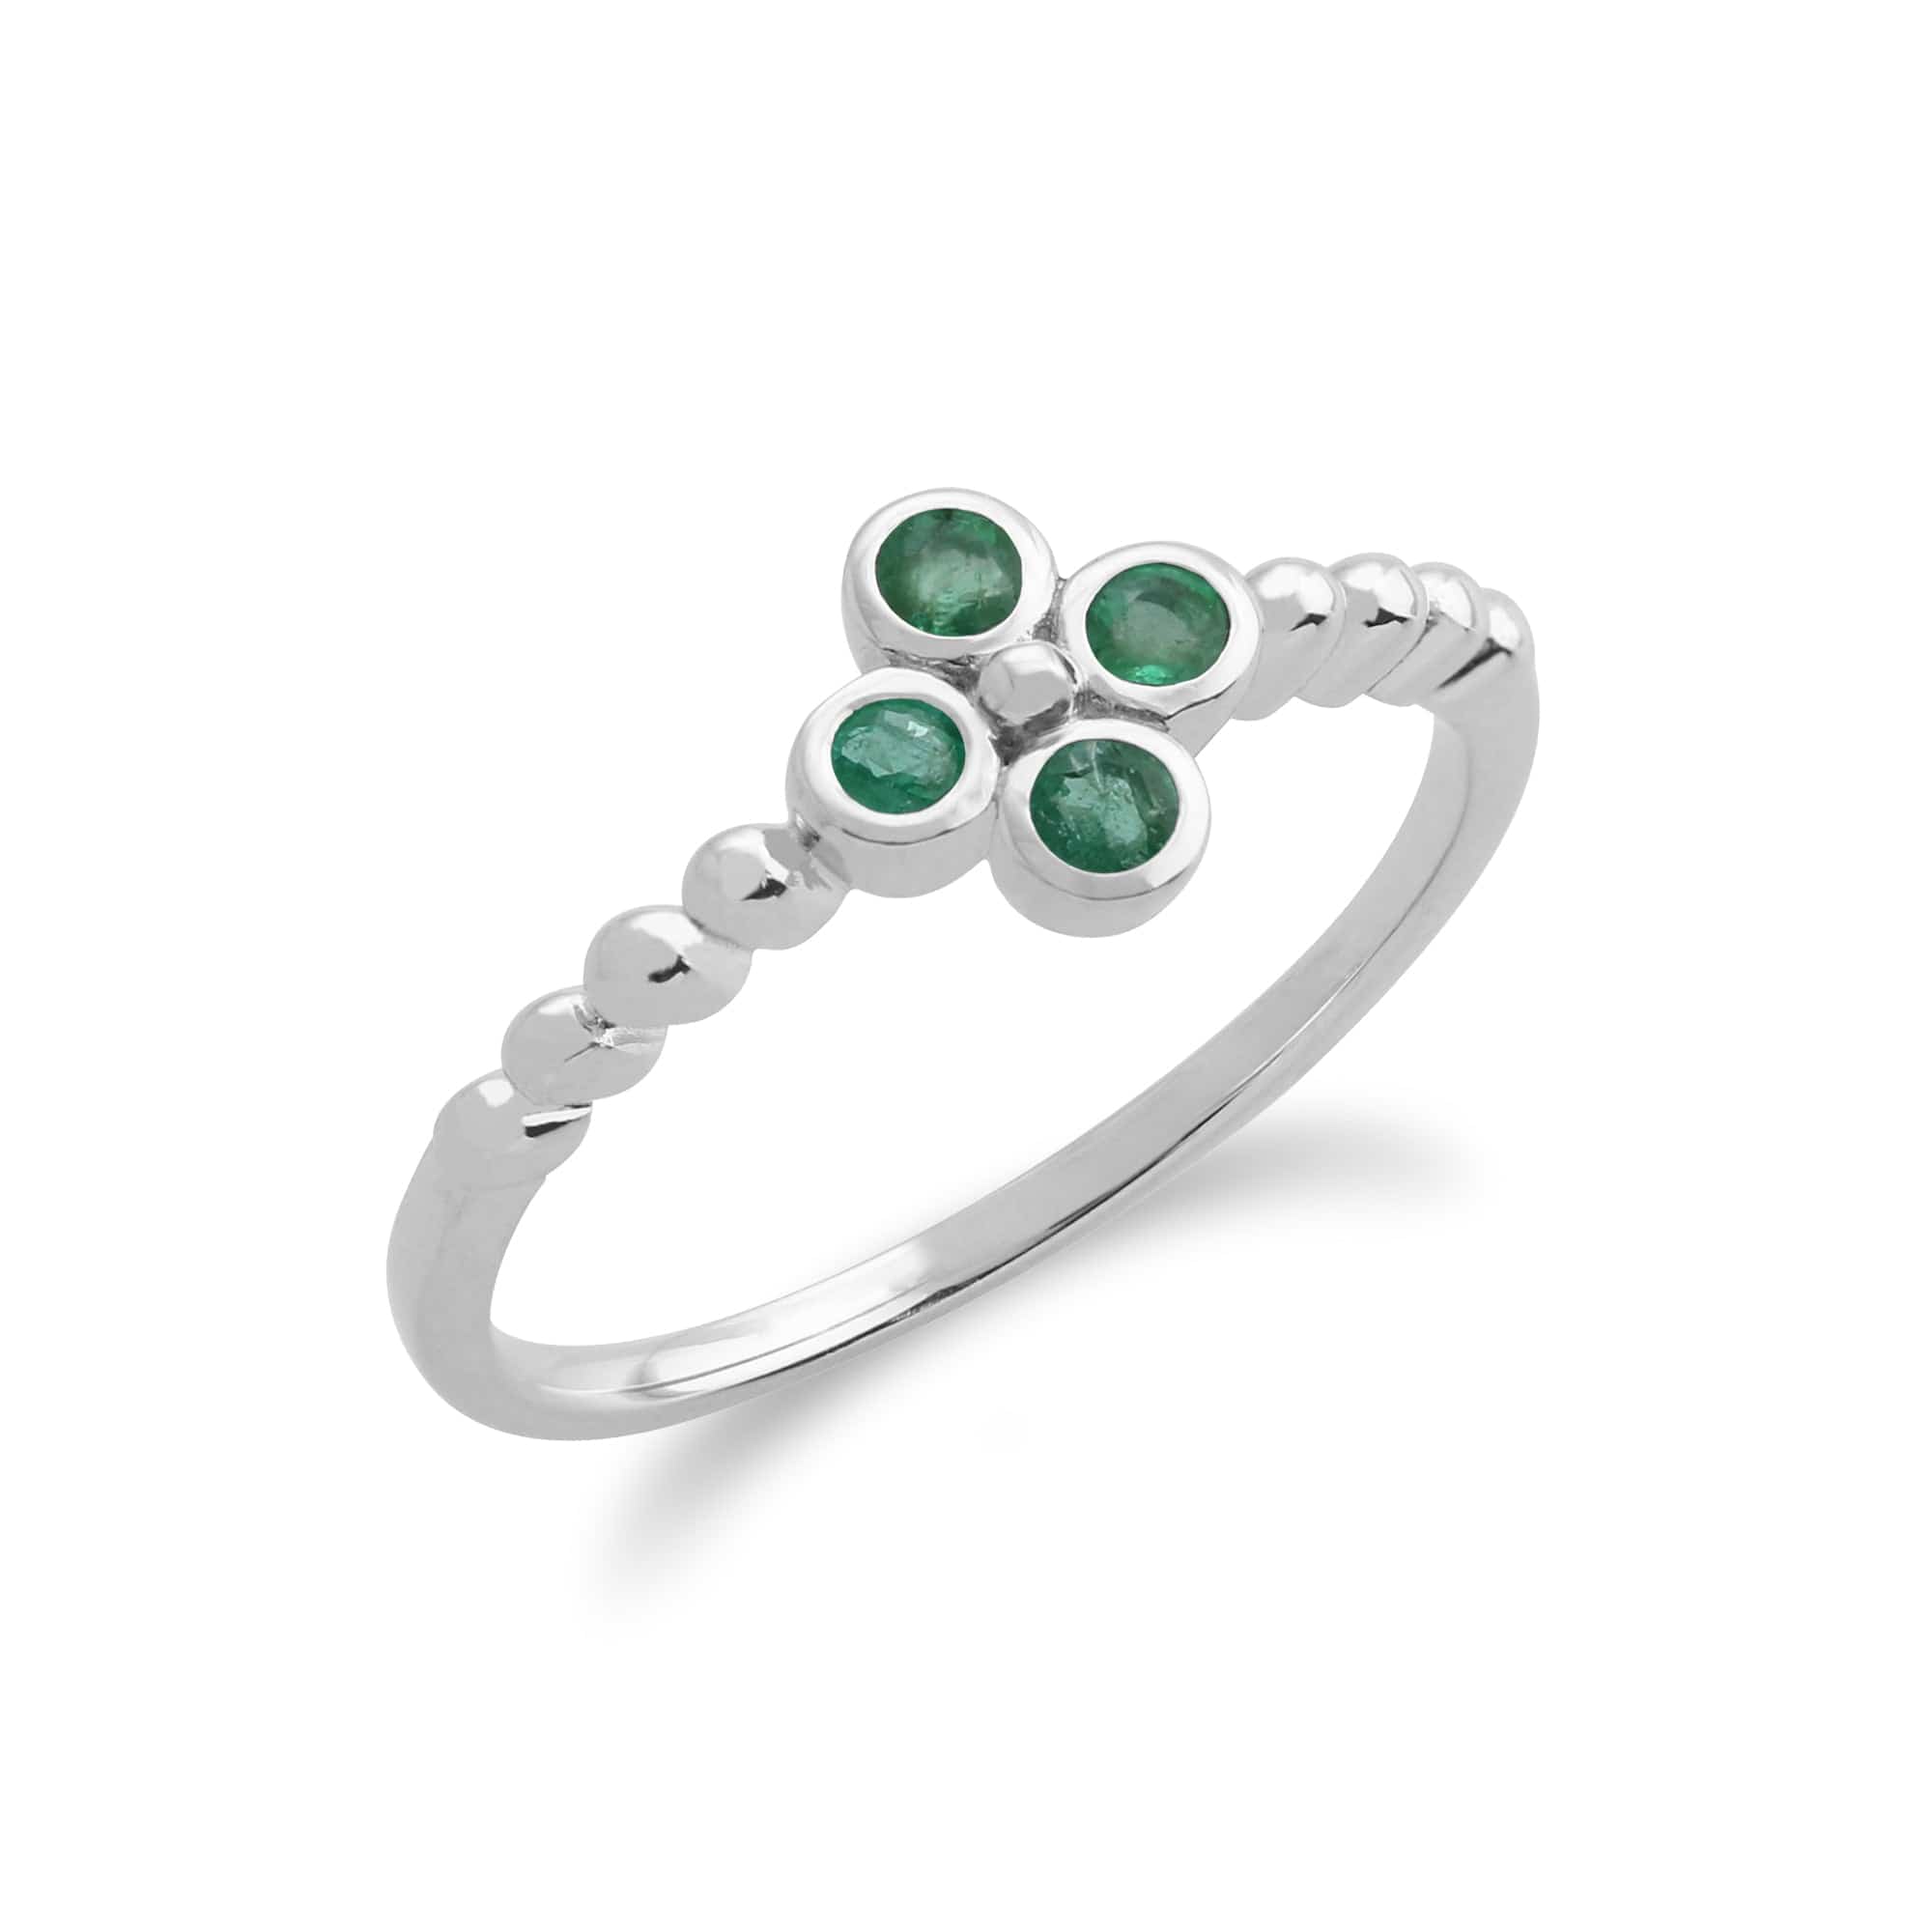 Gemondo Sterling Silver 0.19ct Emerald Cluster Ring Image 1